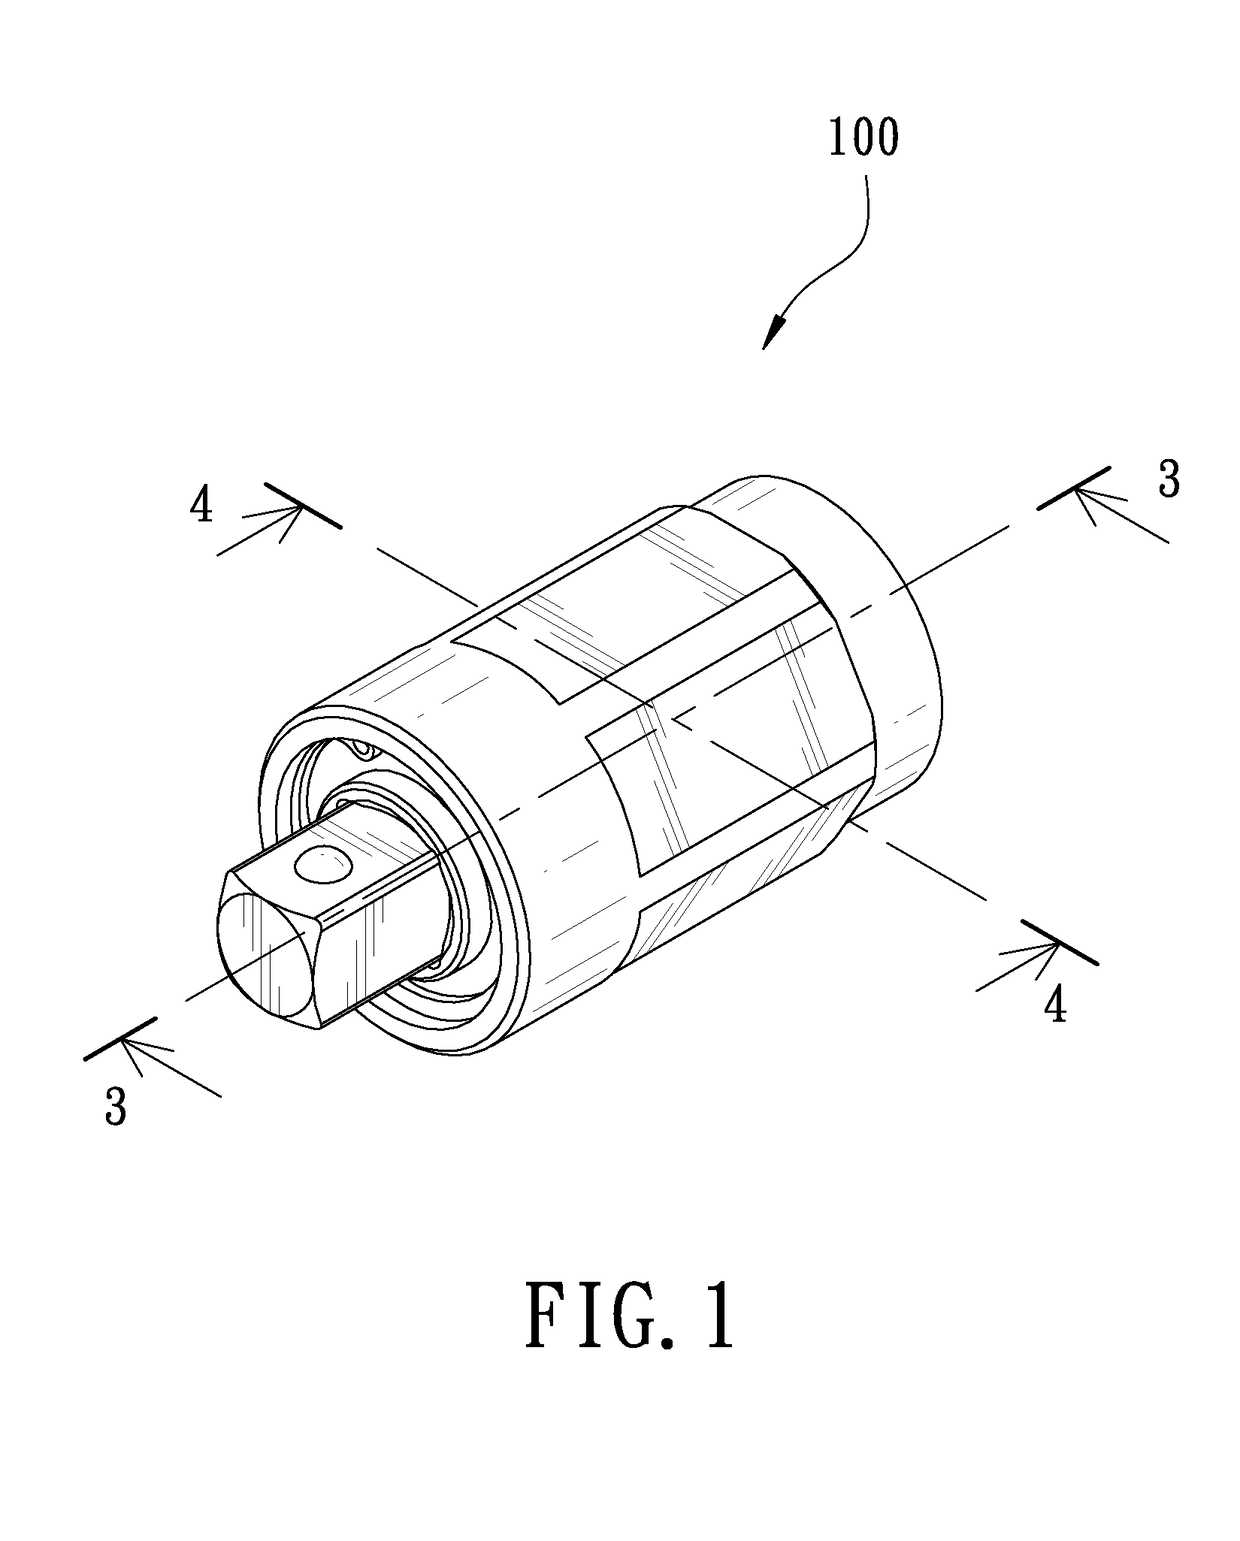 Hand tool adapter capable of increasing output torque or rotational speed